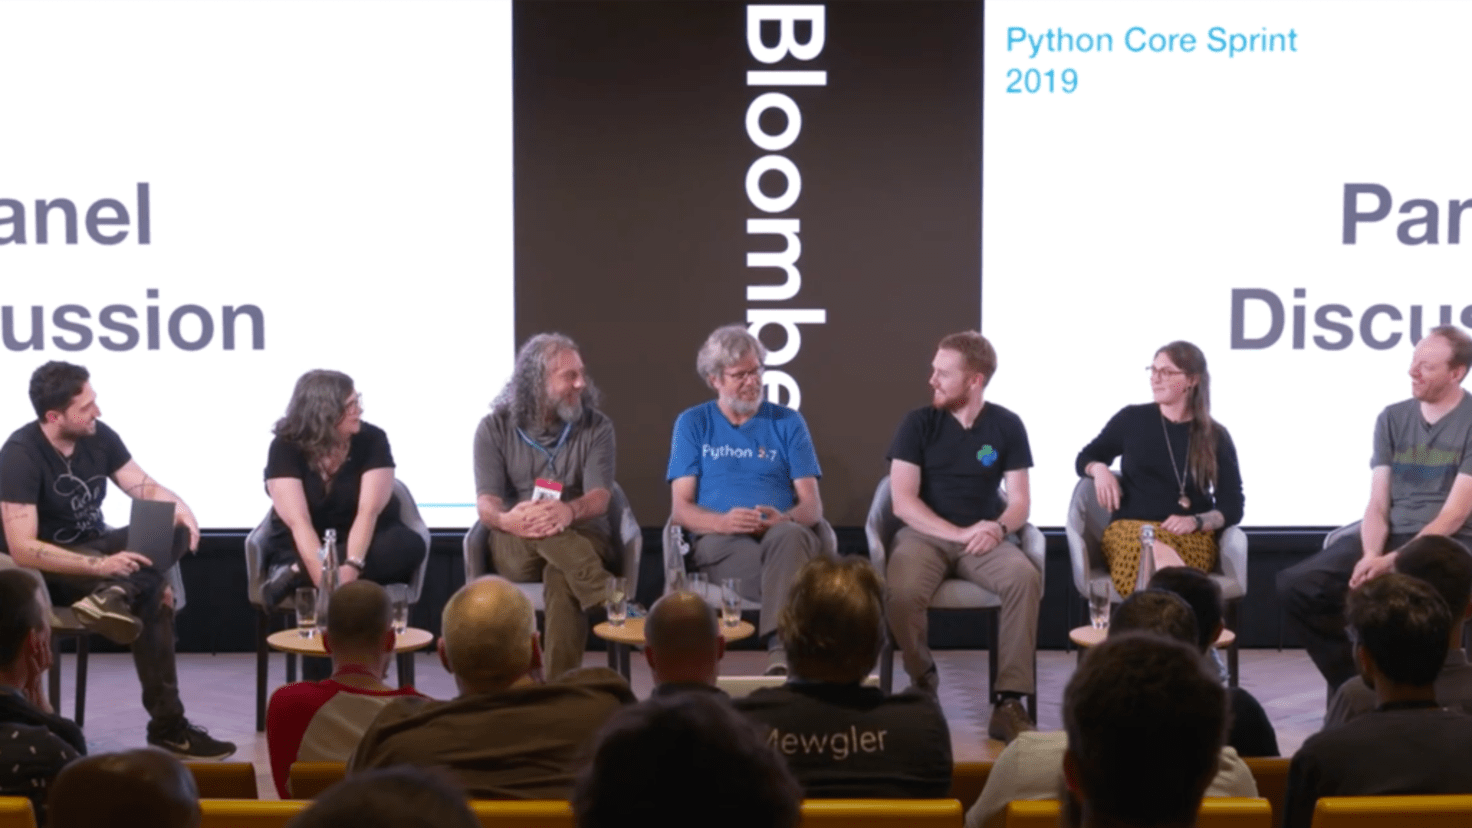 A panel of Python core developers engaging in a Q&A session at Bloomberg's London office, symbolizing collaboration and innovation in the Python community.